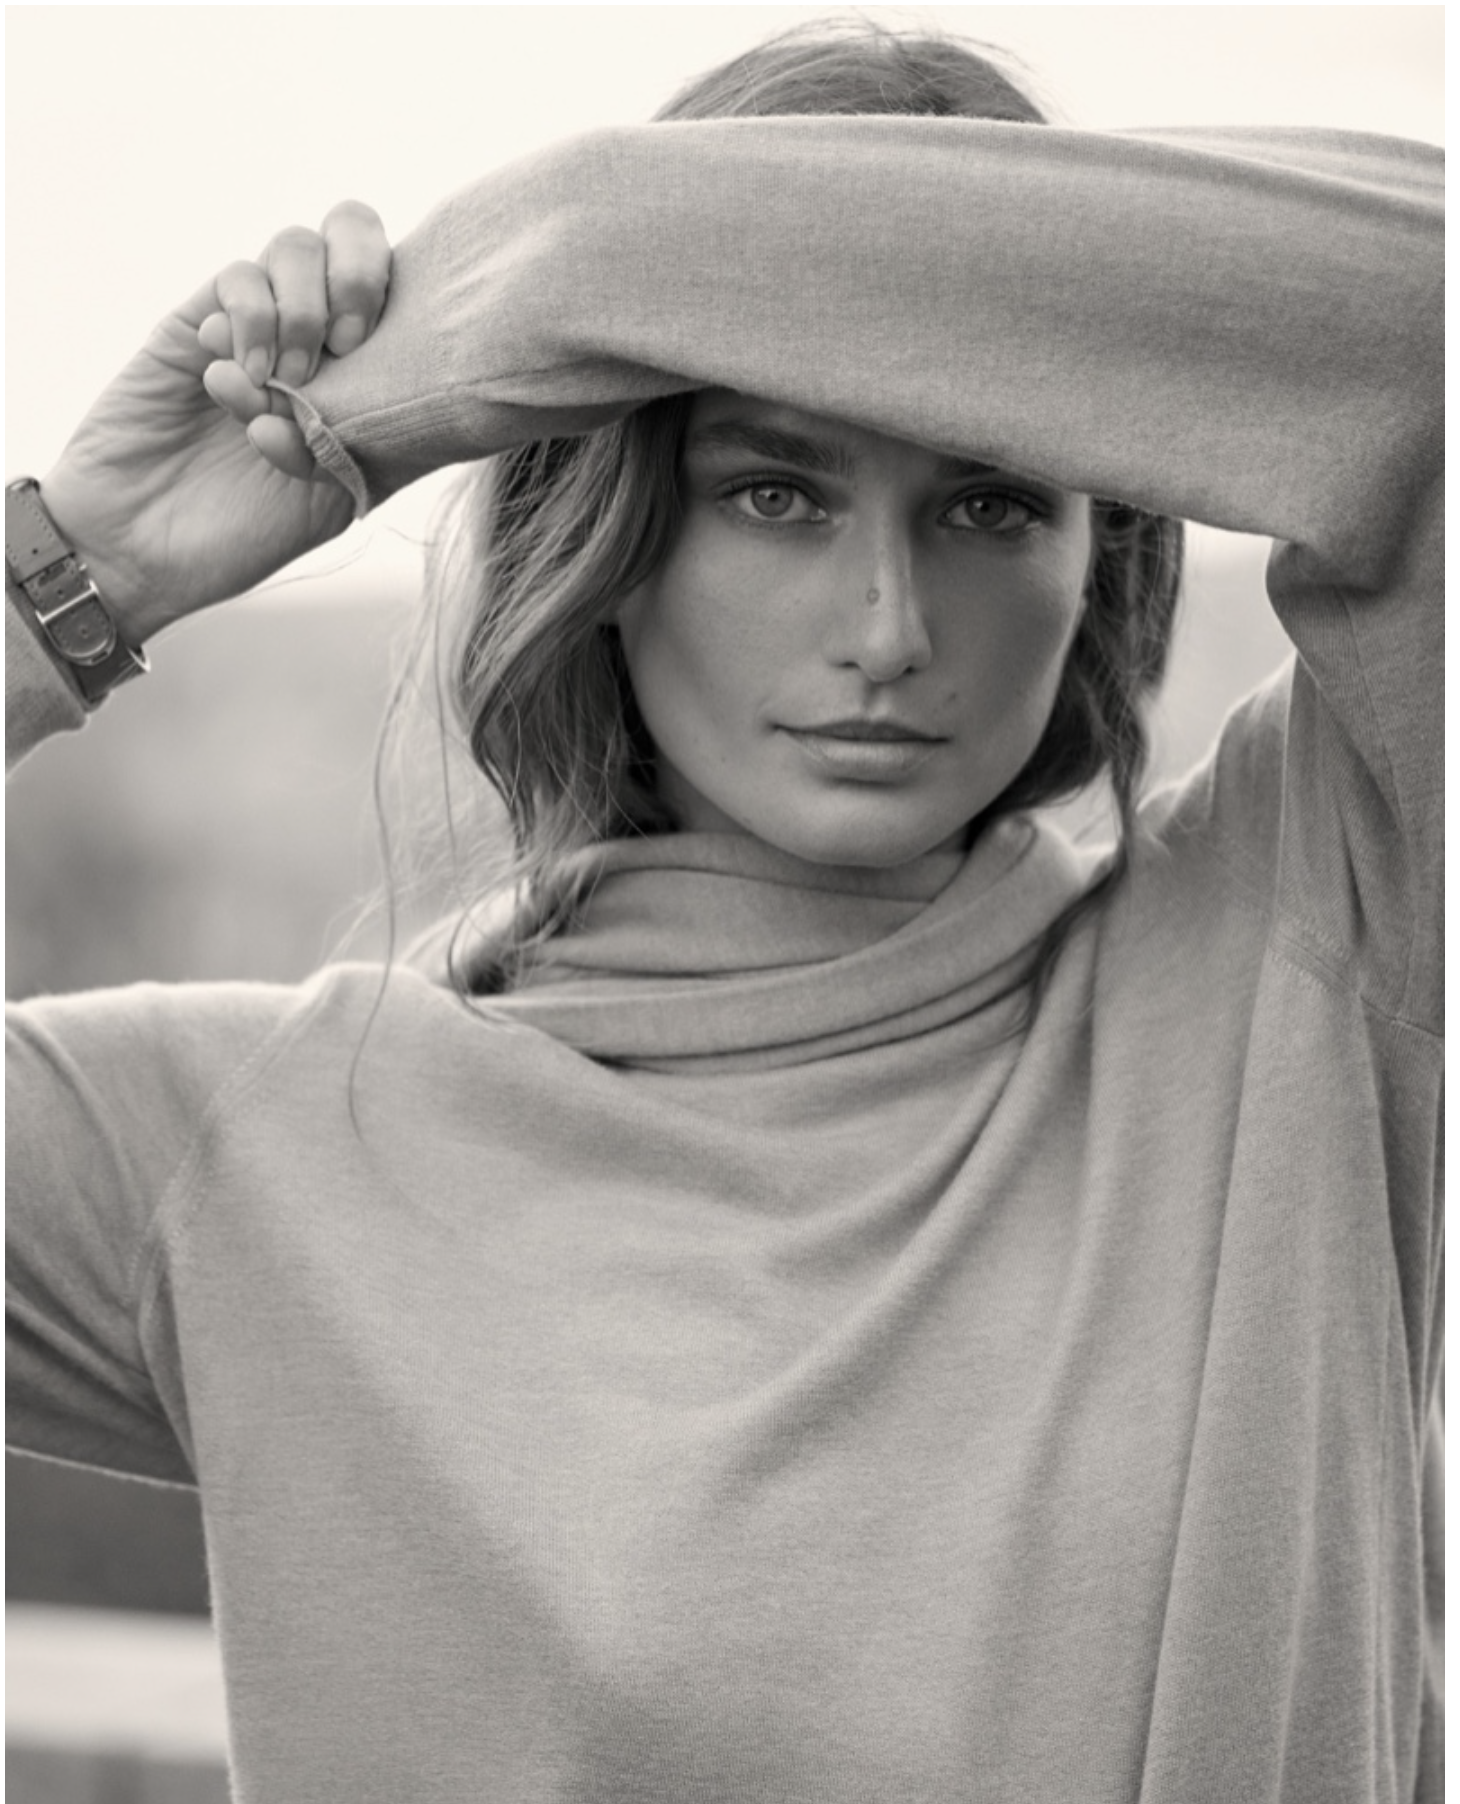 Ralph-Lauren-Cradle-to-Cradle-Certified-Gold-Cashmere-Campaign-00005.png